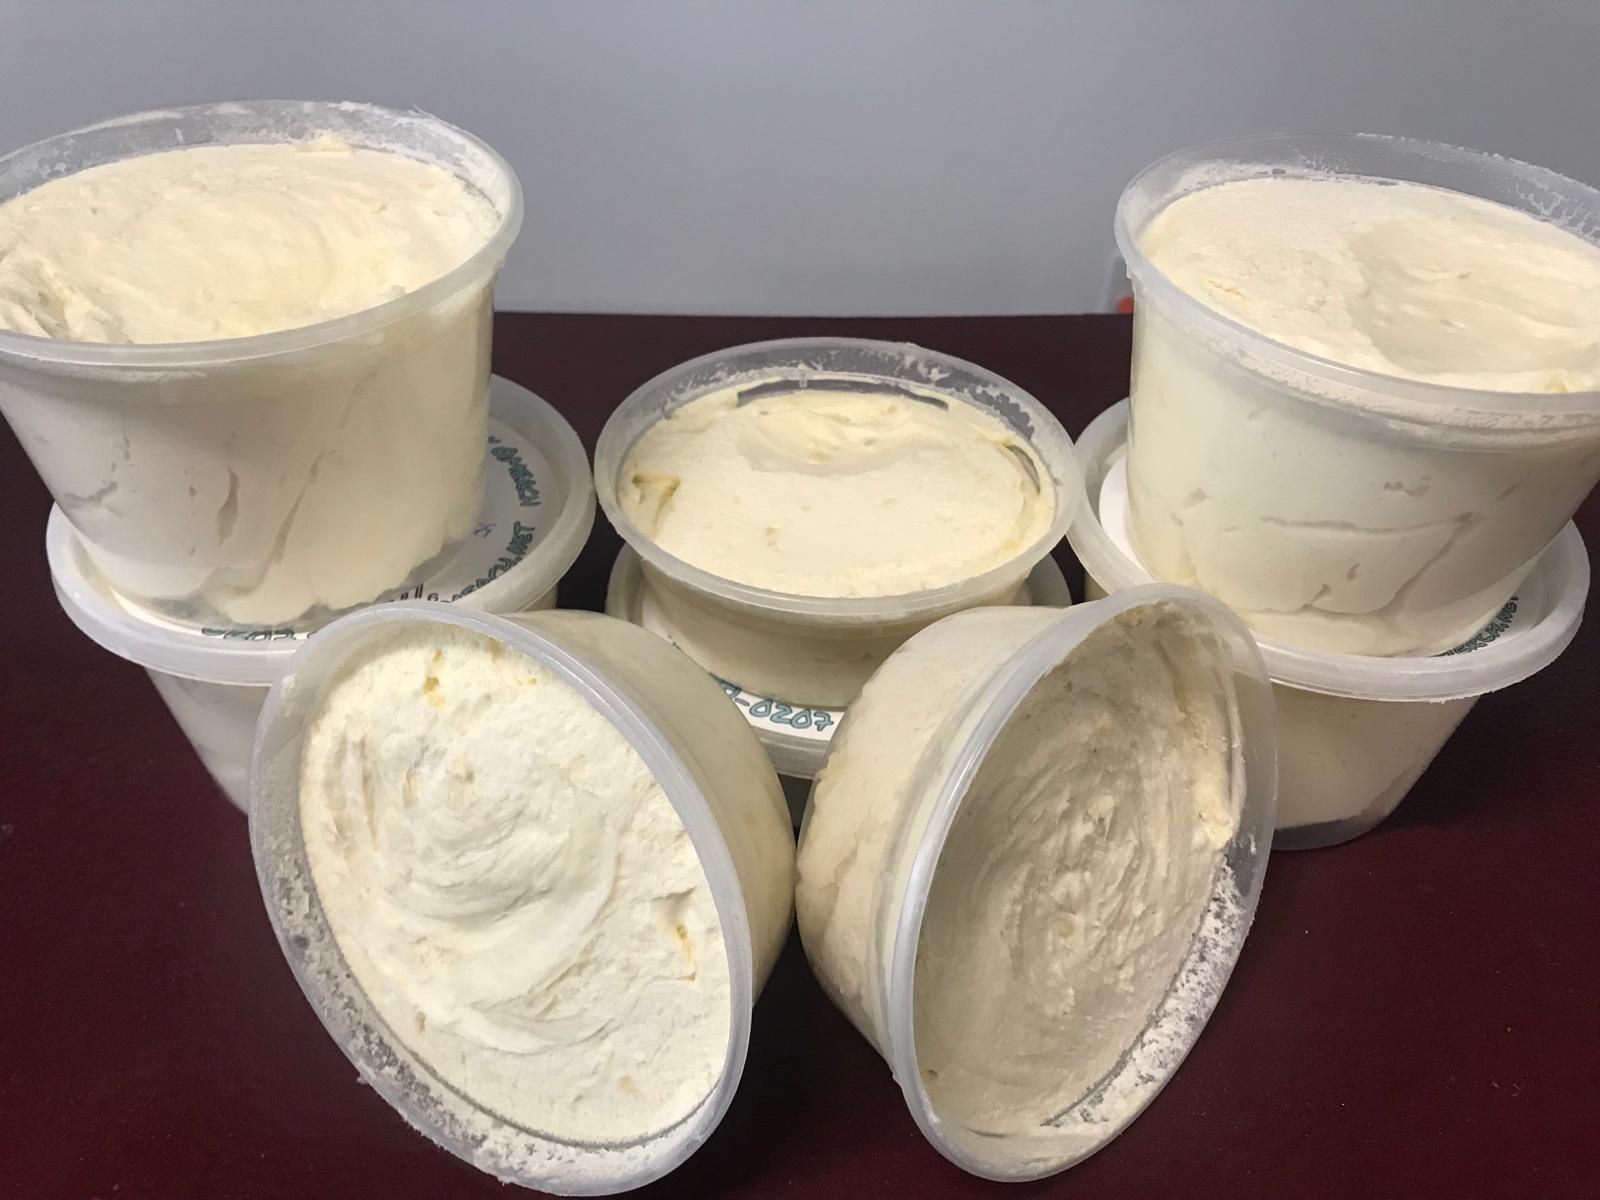 Scented Shea Butter - Whipped Shea Butter Scented - Qmerch Stores Inc.